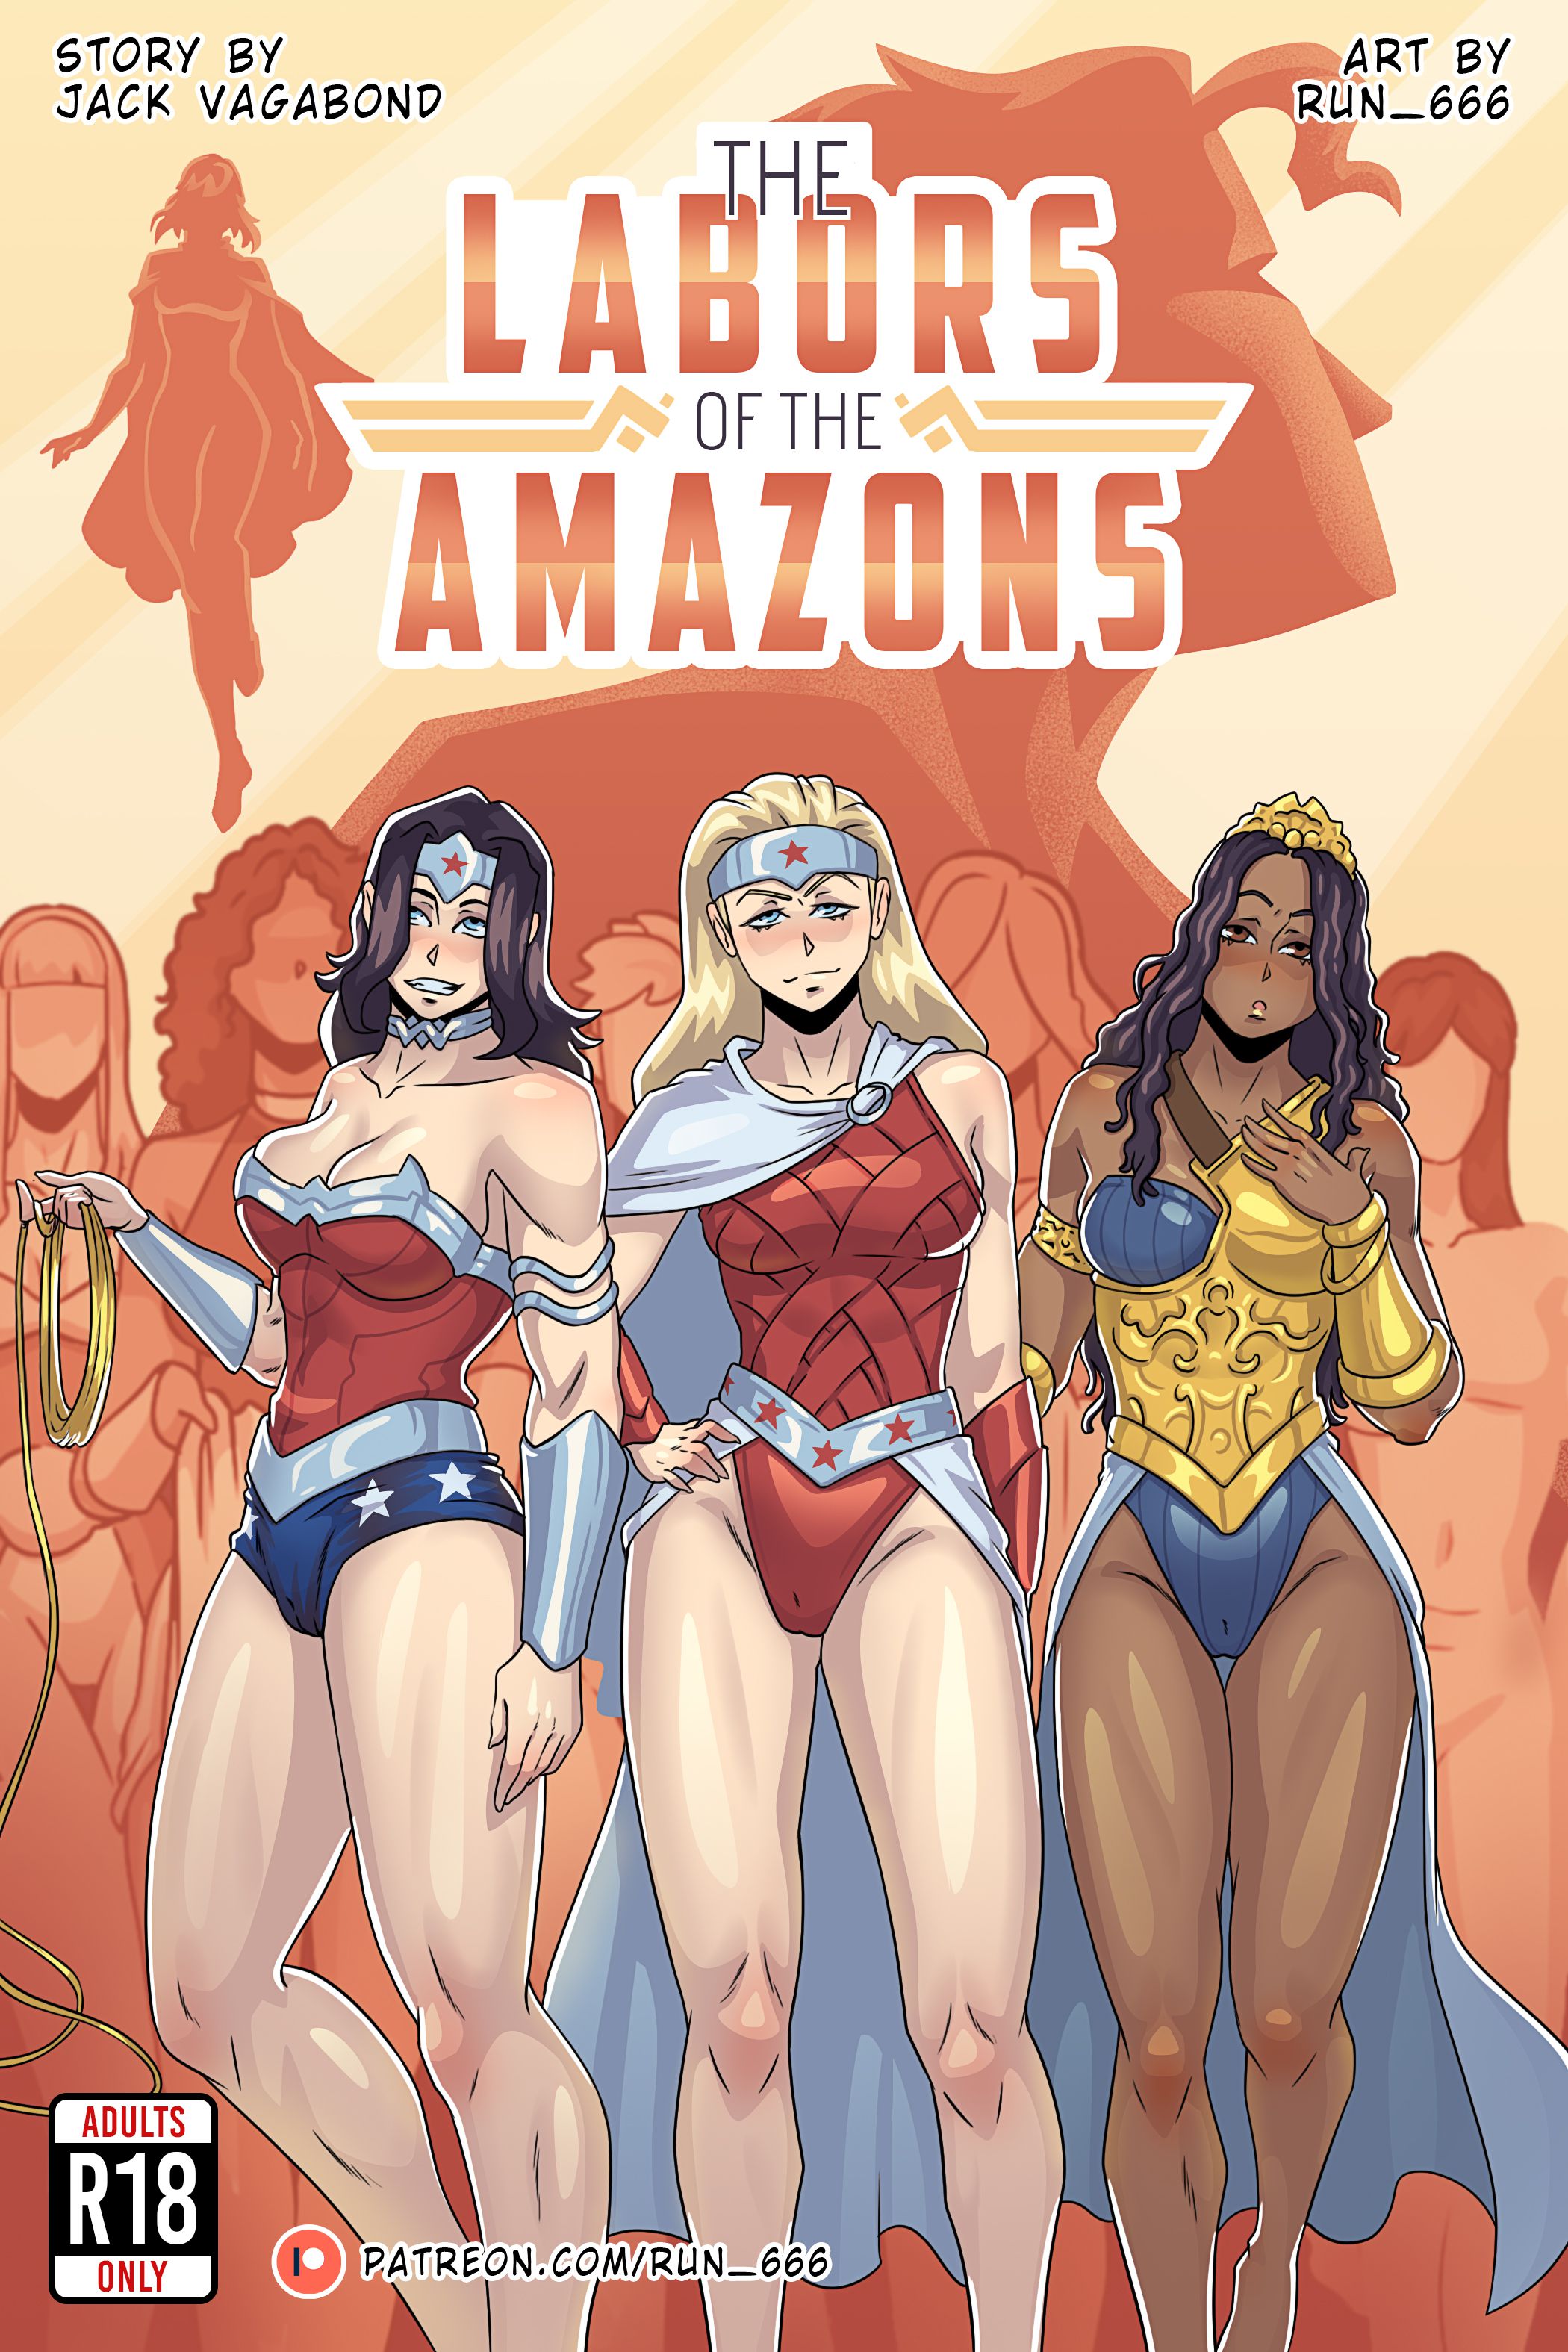 The Labors of the Amazons (Wonder Woman) [Run 666] - 1 . The Labors of the  Amazons - Chapter 1 (Wonder Woman) [Run 666] - AllPornComic